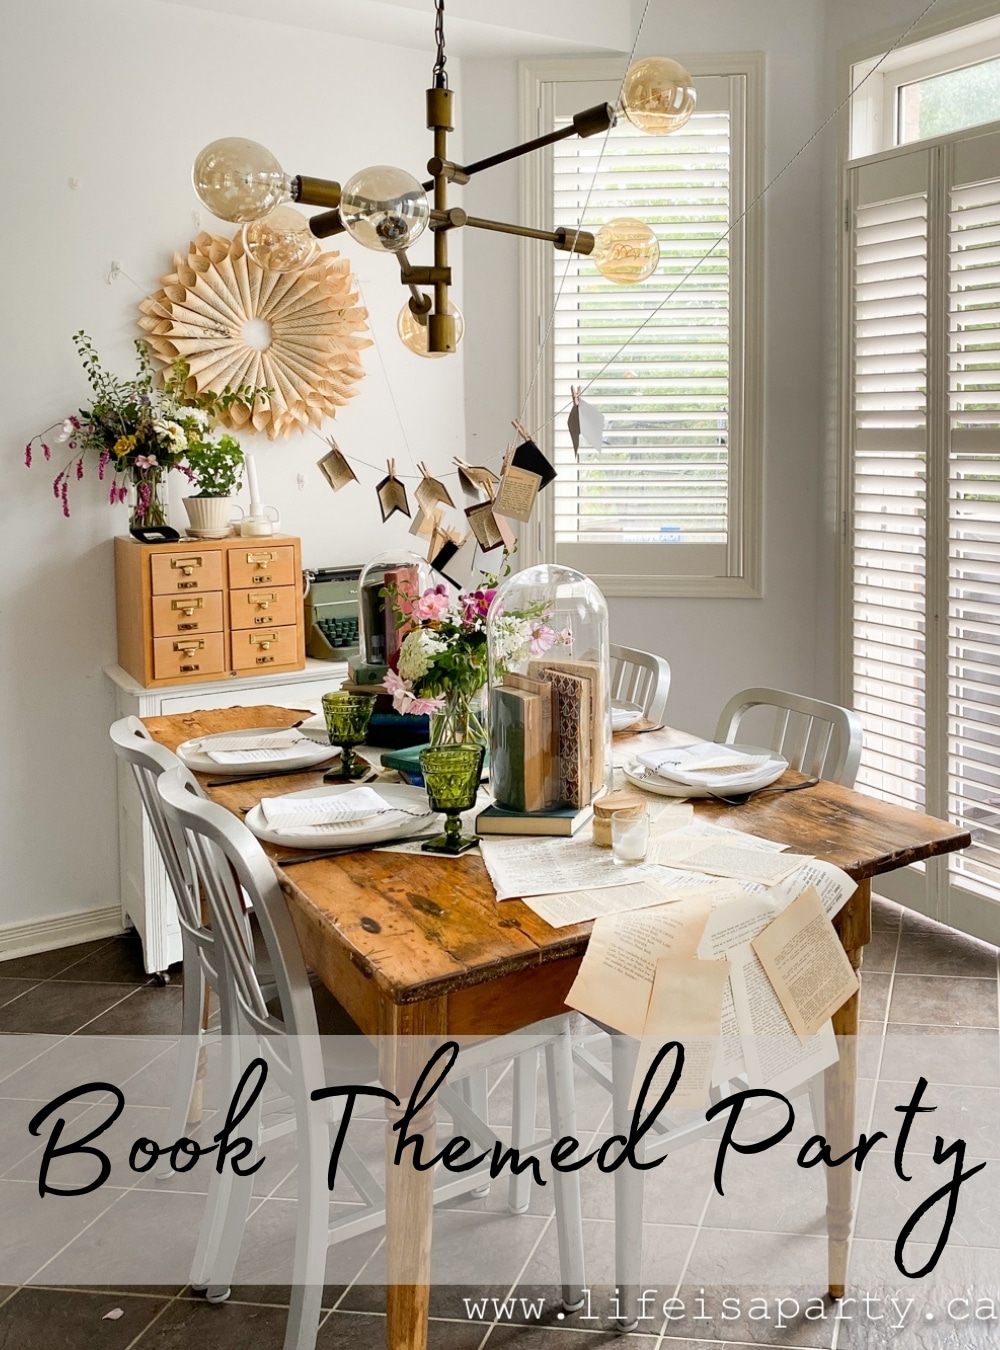 Book Themed Party: book page wreath, DIY mini book garland, book page table runner, and lots of fun vintage books and other pieces.